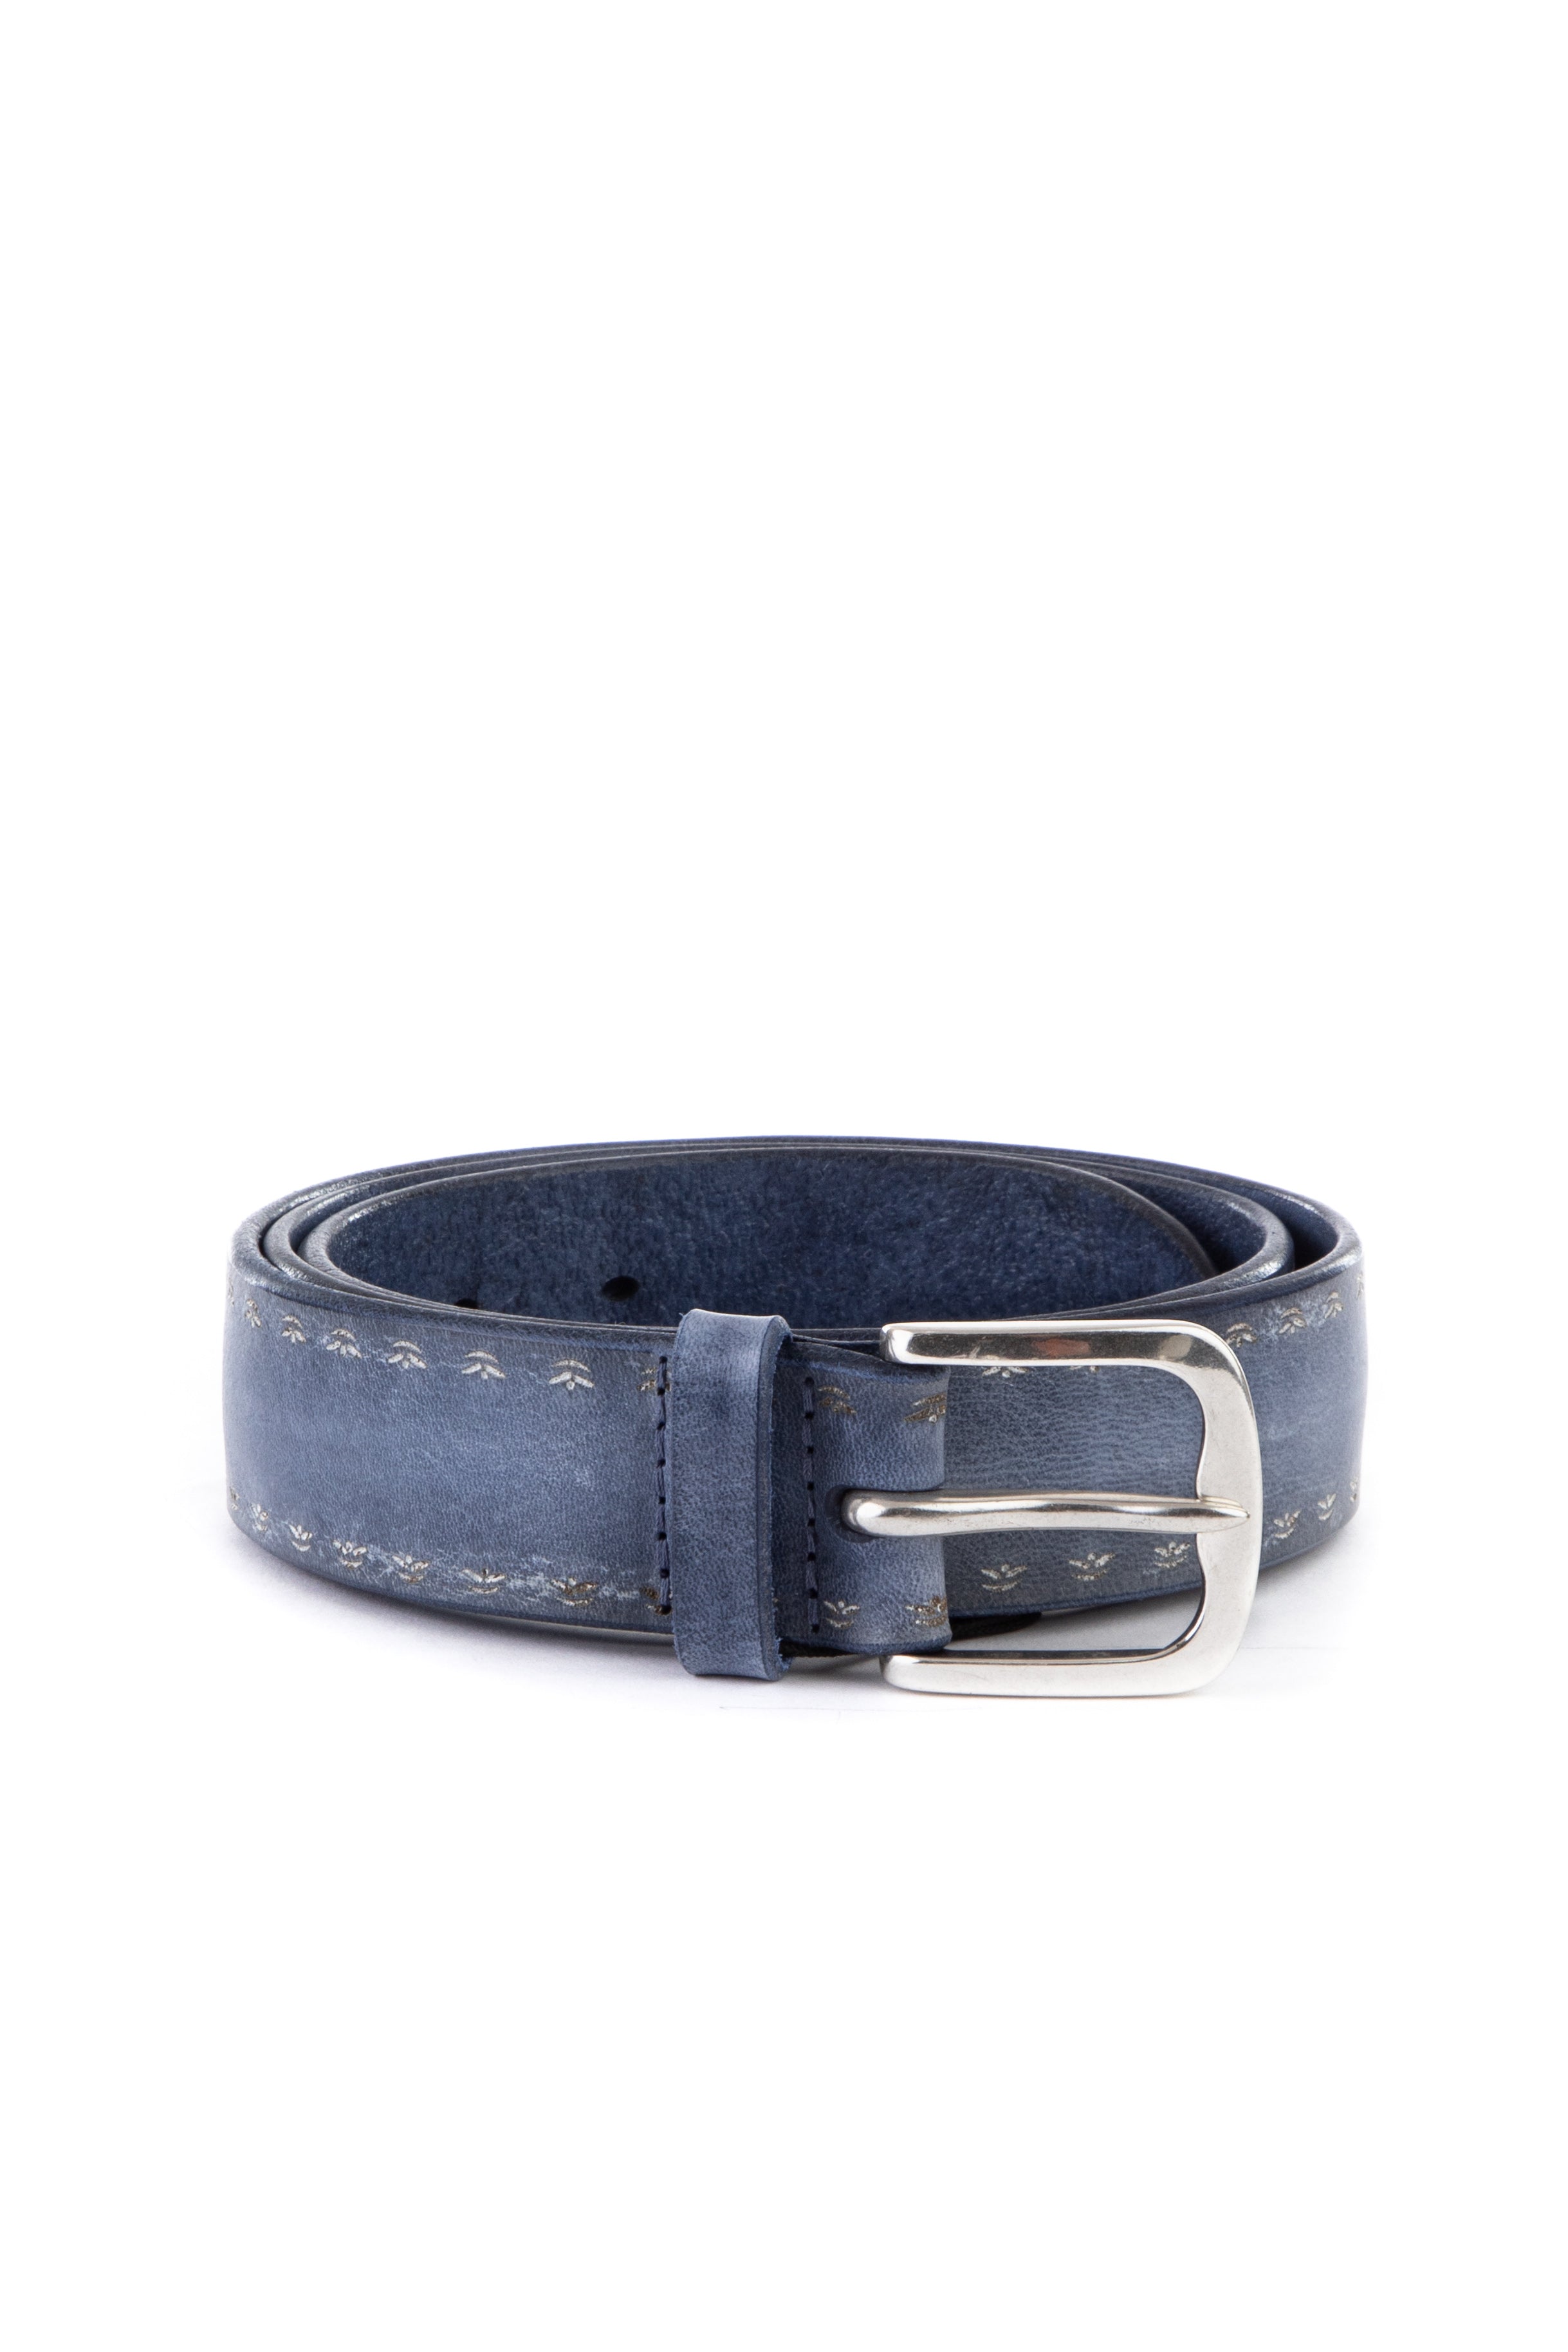 Faded leather belt with lasered embroidery